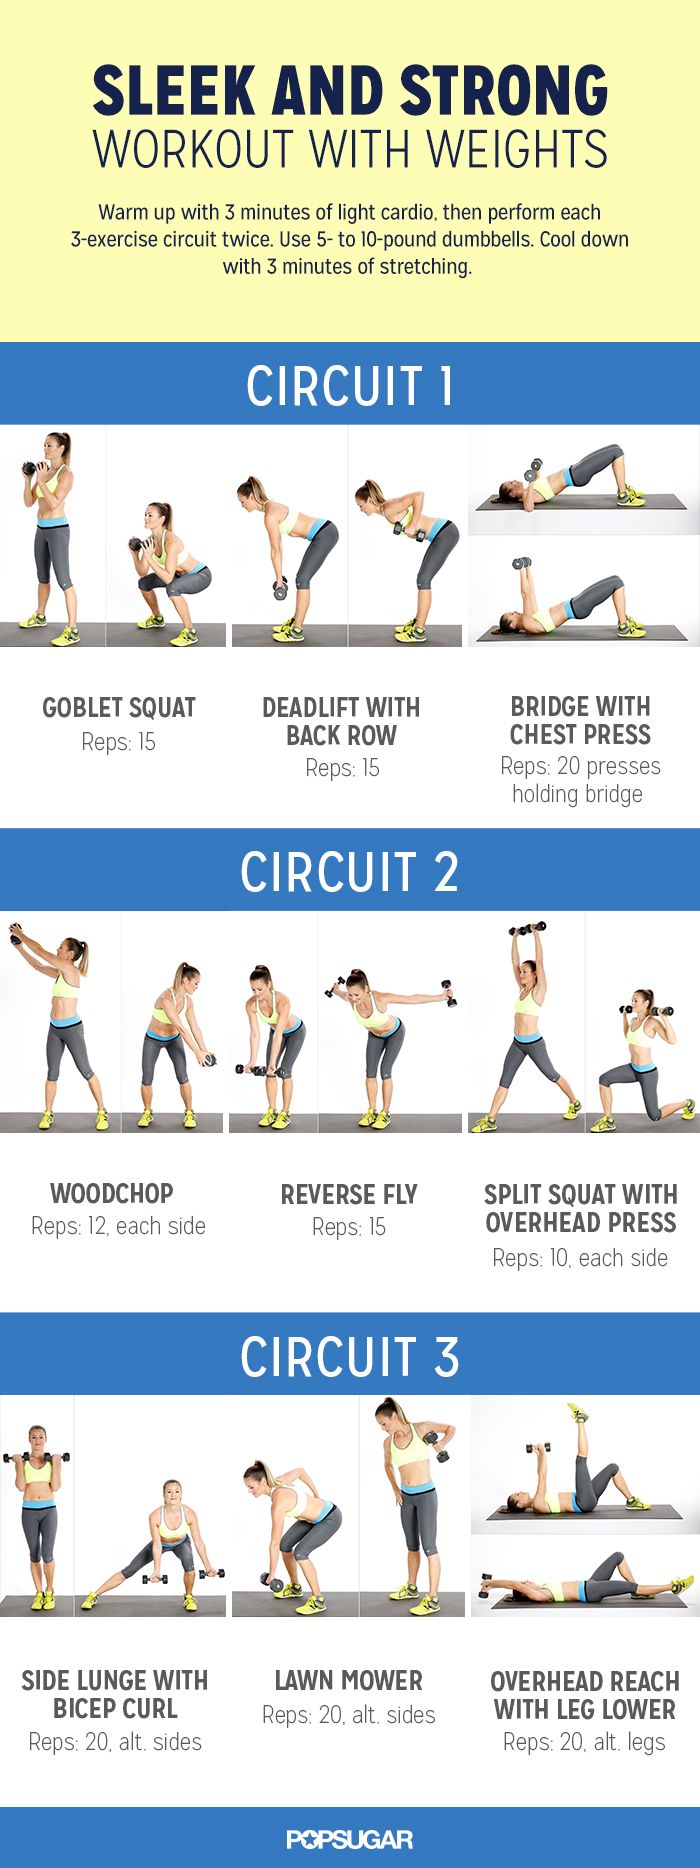 workout-with-weights-to-help-strengthen-your-core